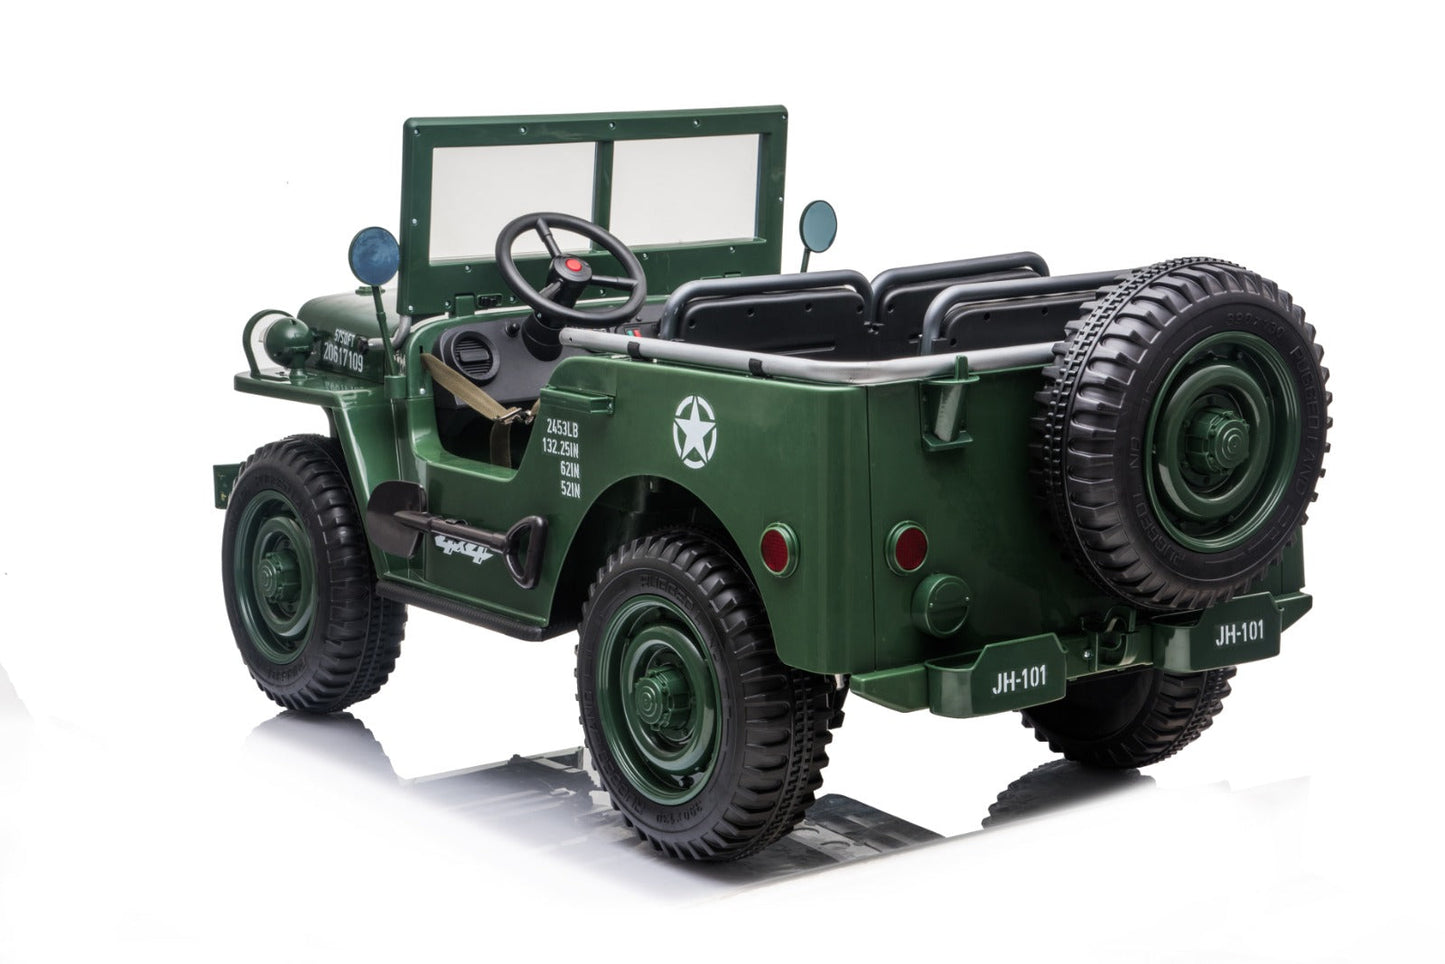 Vintage military-style Willys Jeep 4WD, dark green 3-seater ride on jeep for kids on a white background.